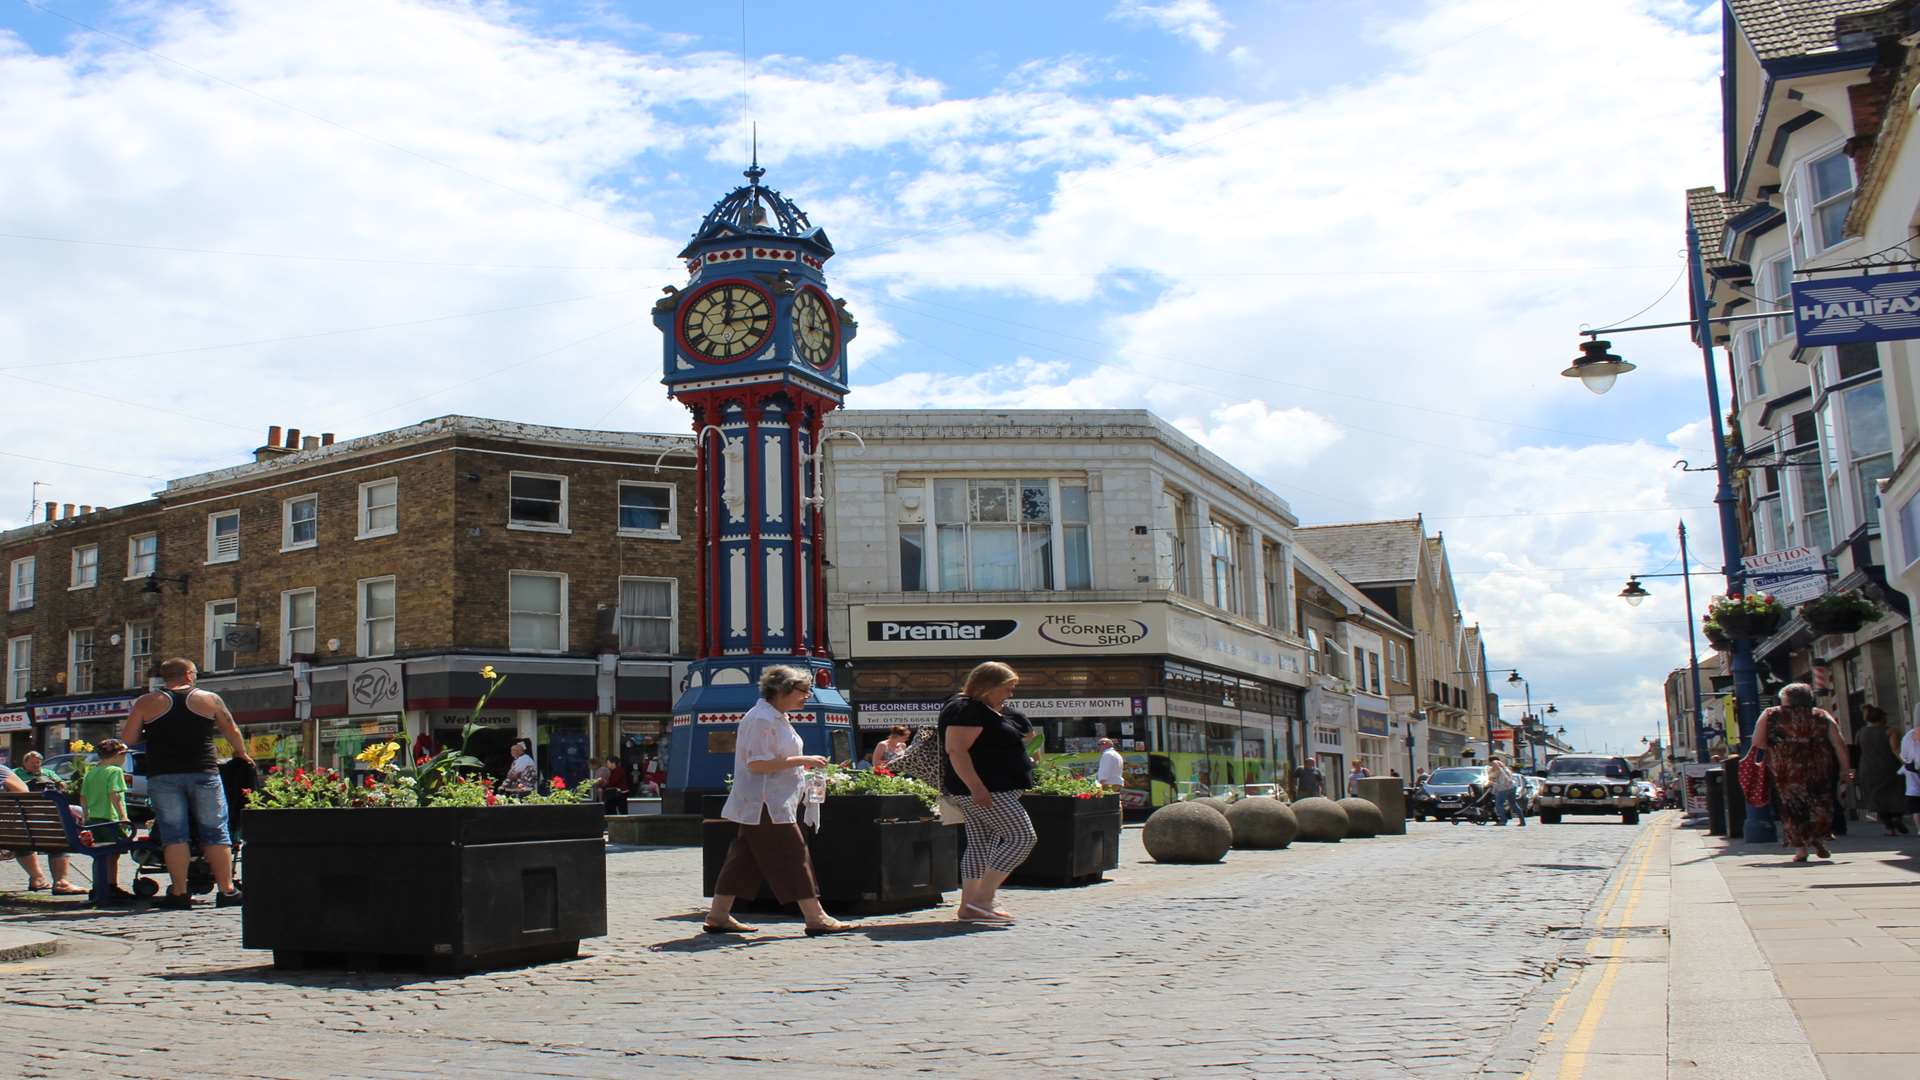 A town council for Sheerness?